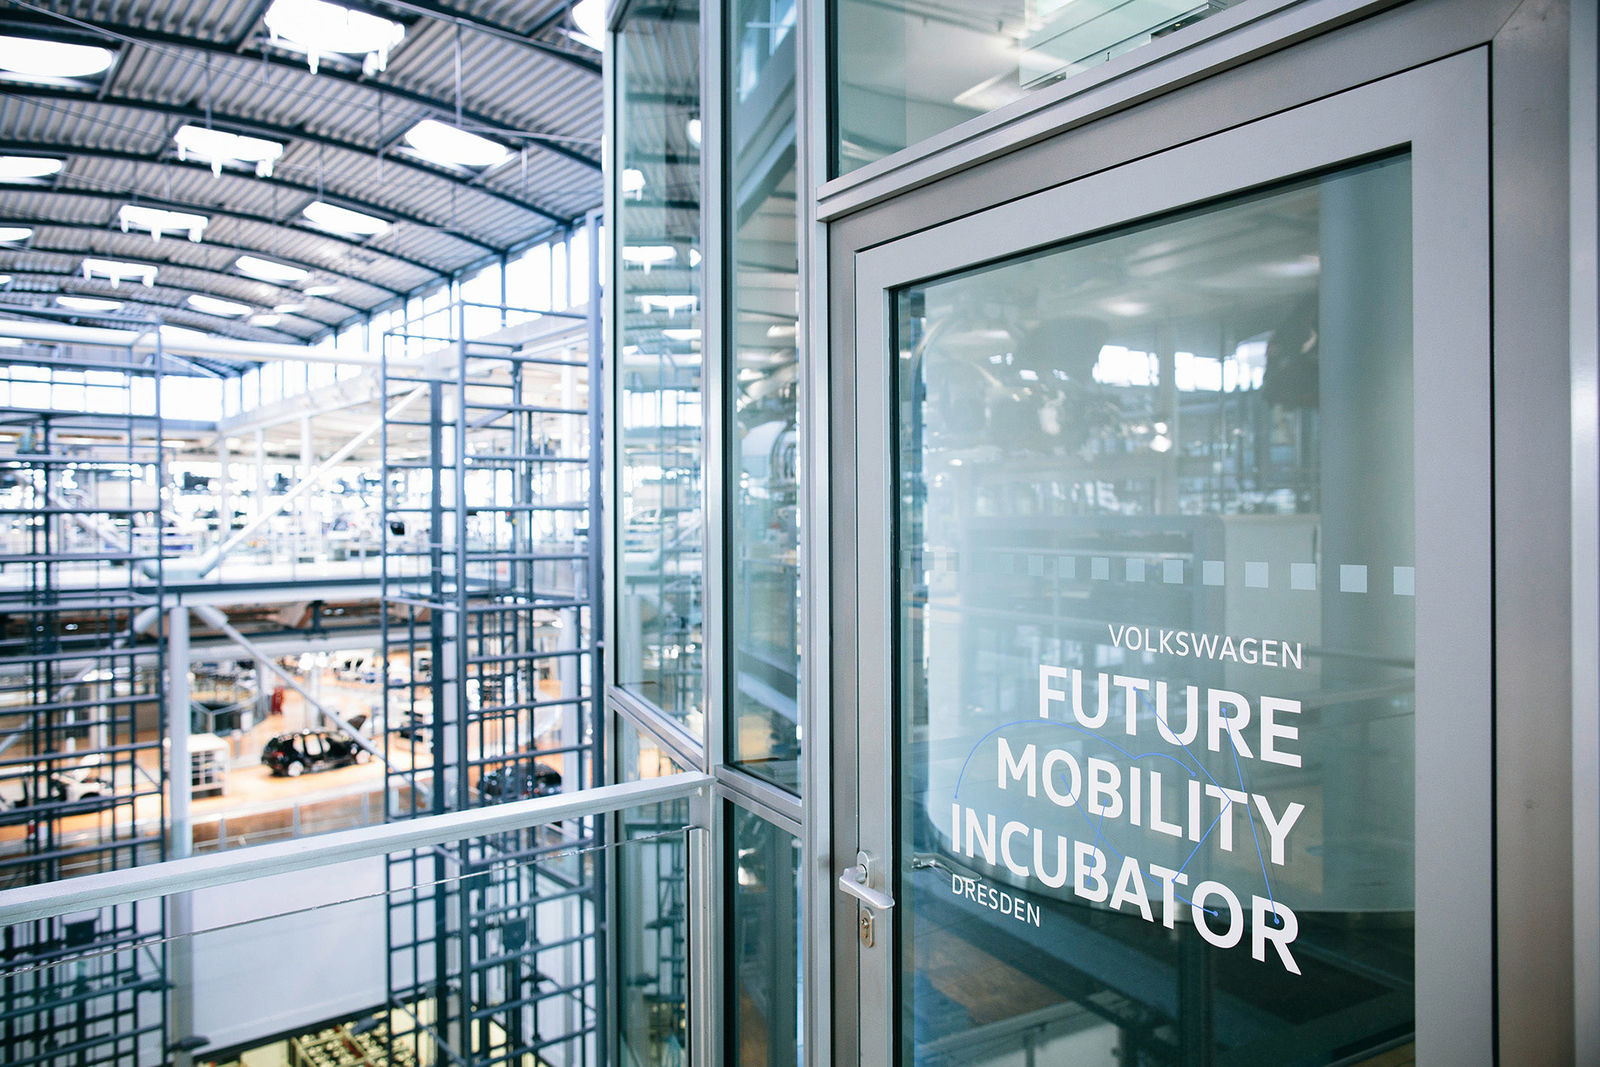 Start-up incubator programme from Volkswagen starts with six mobility teams in the Transparent Factory